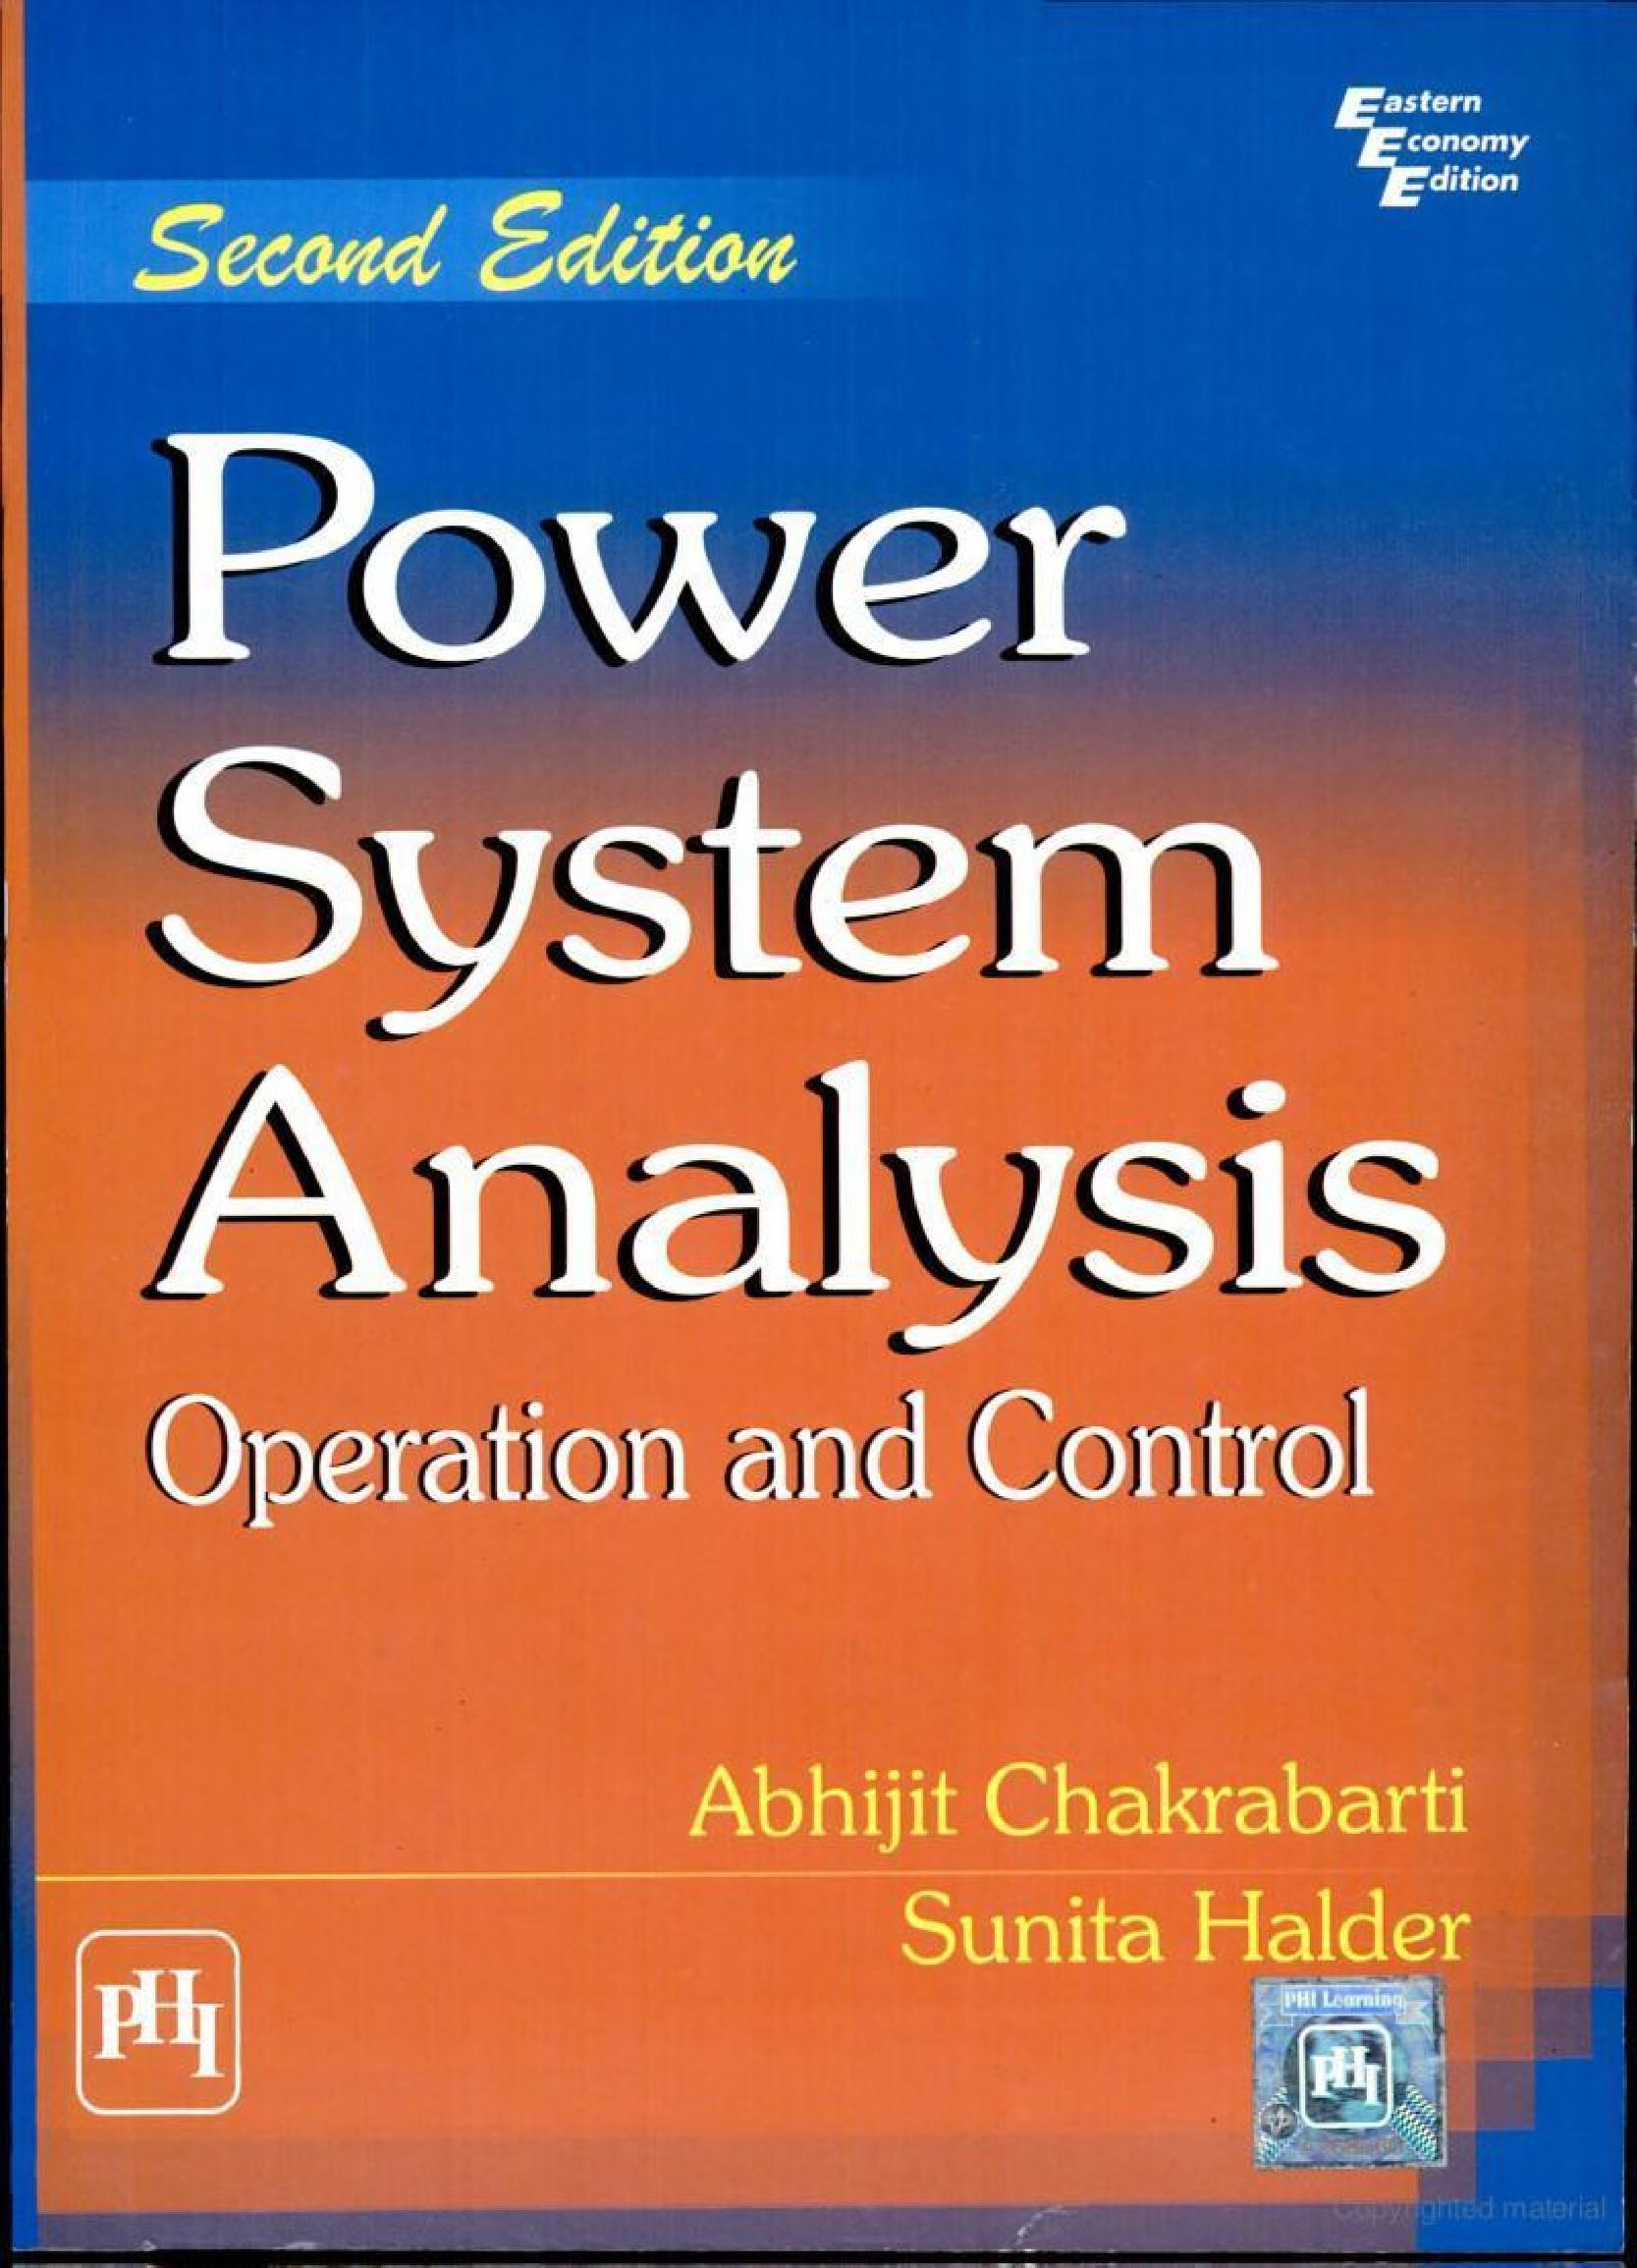 a textbook on power system engineering by a.chakrabarti pdf download